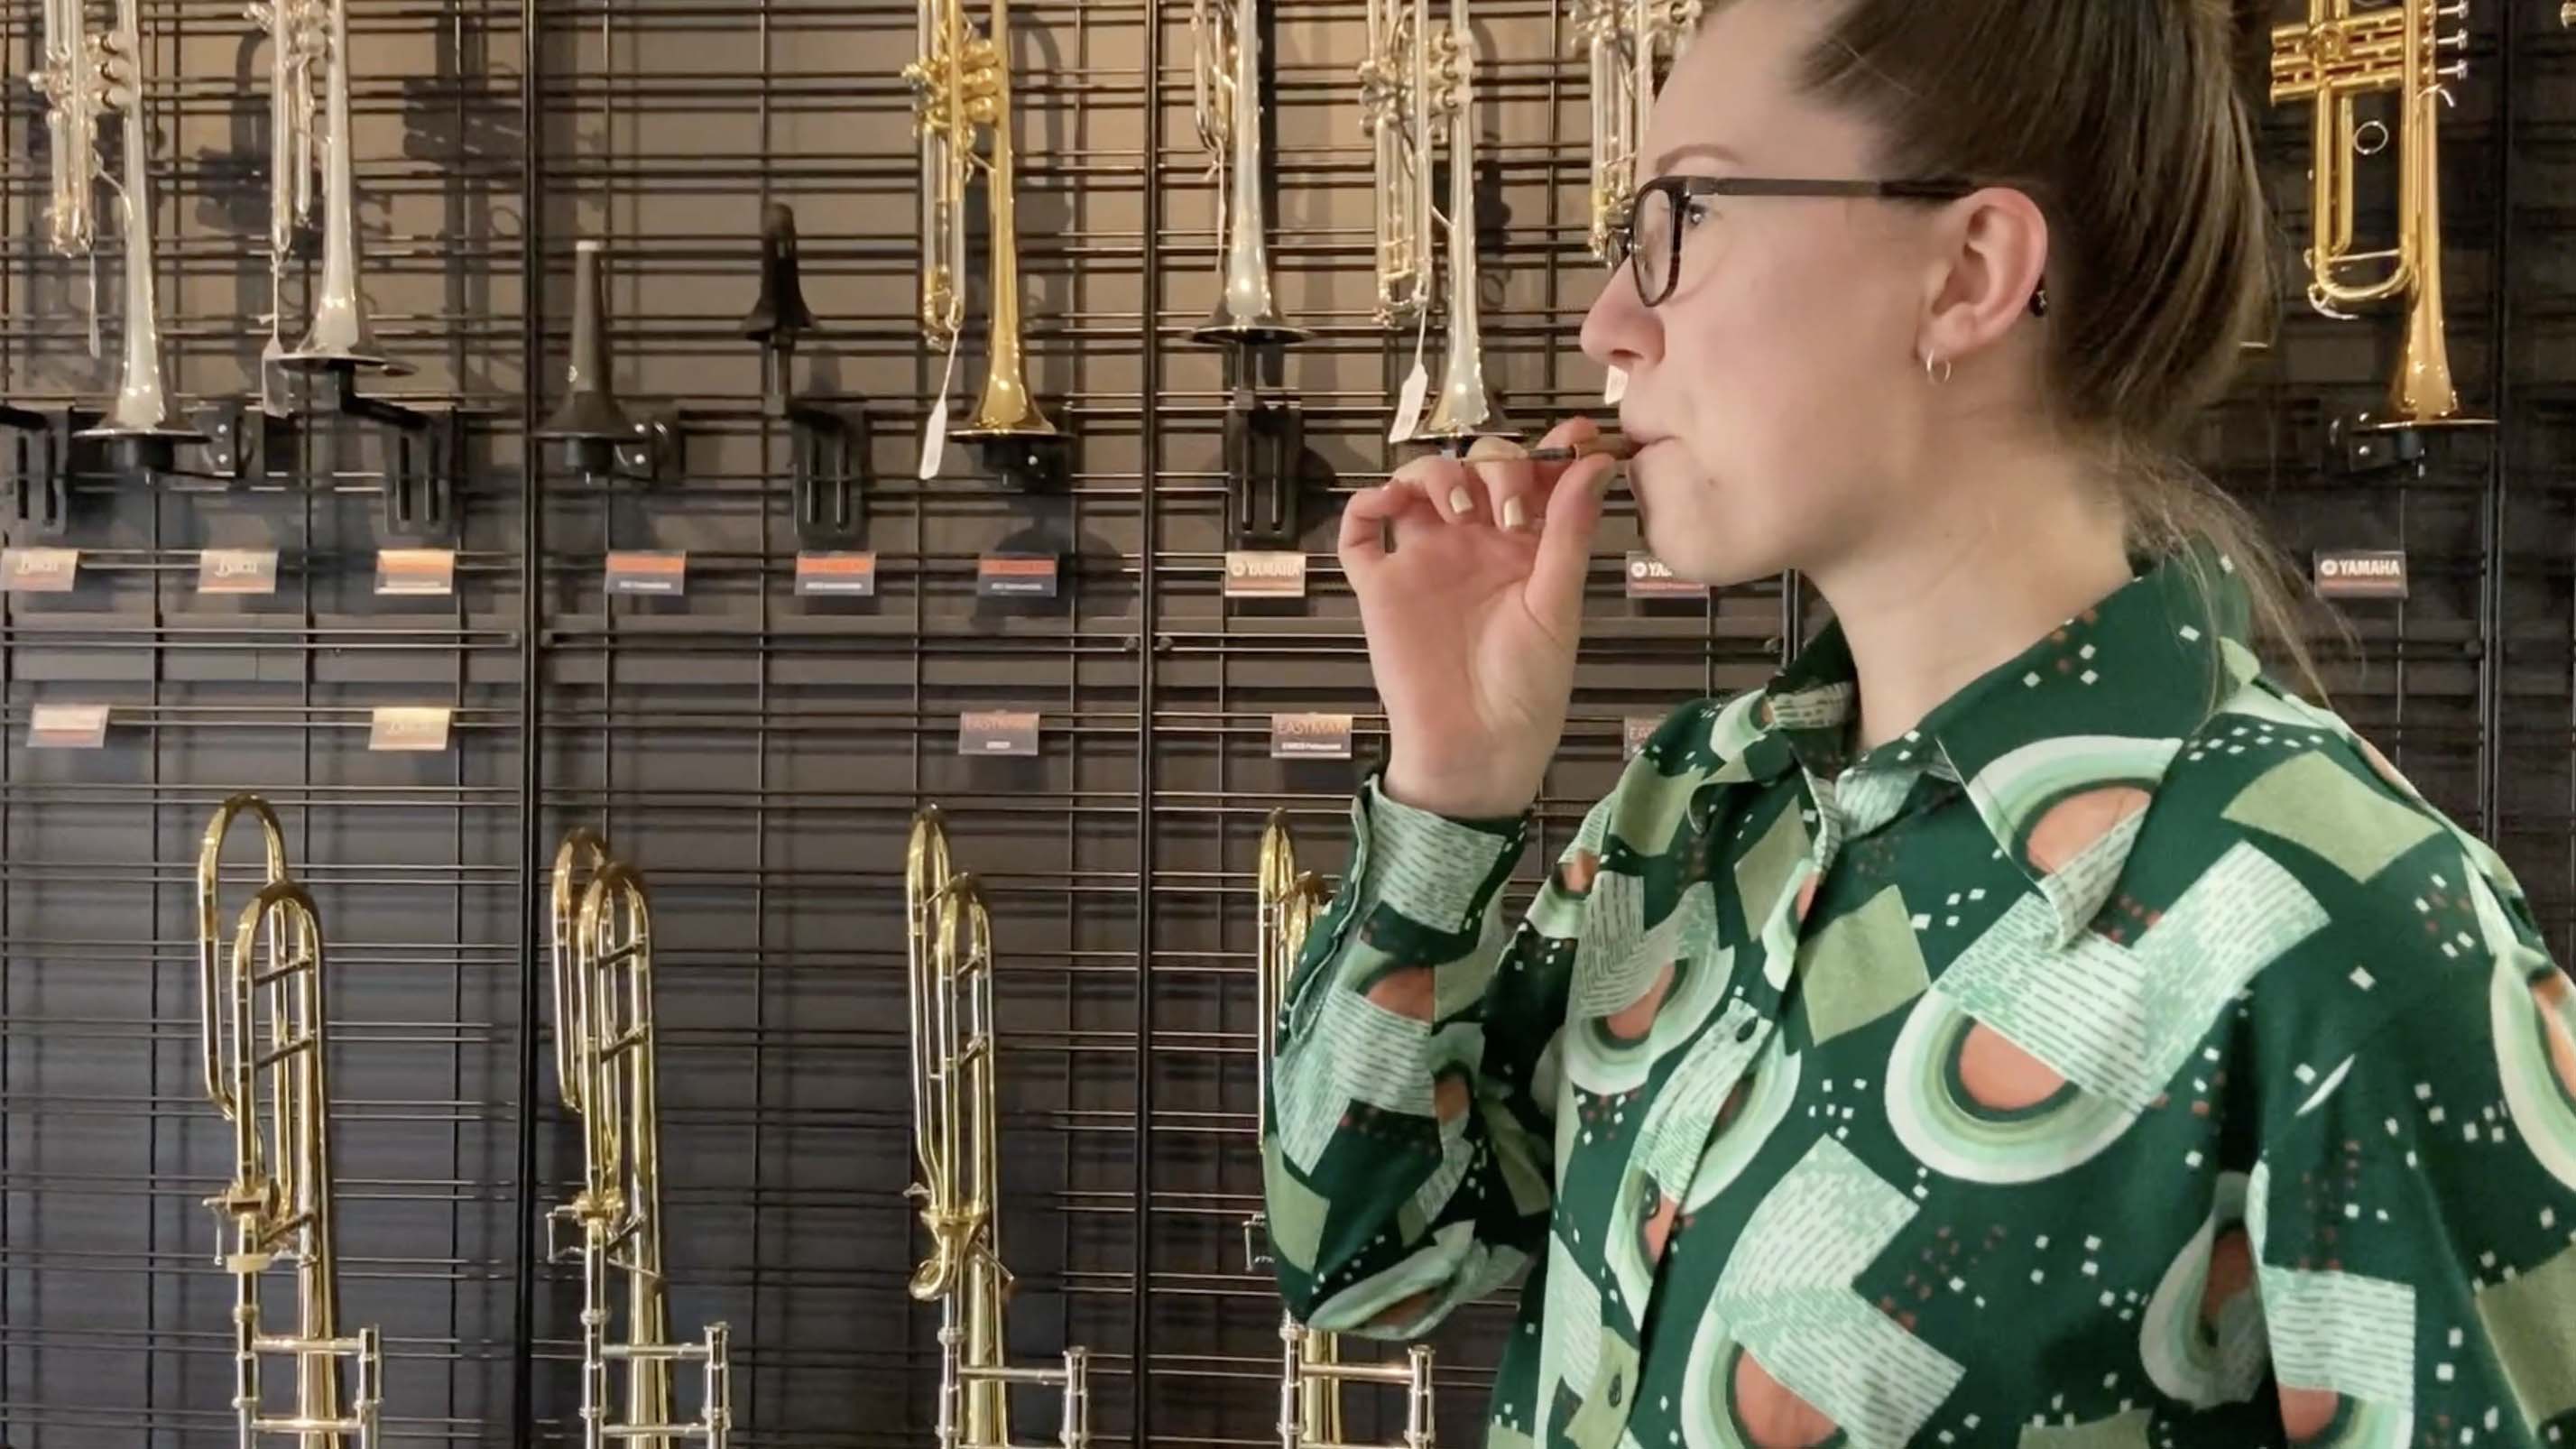 Person blowing through oboe reed.